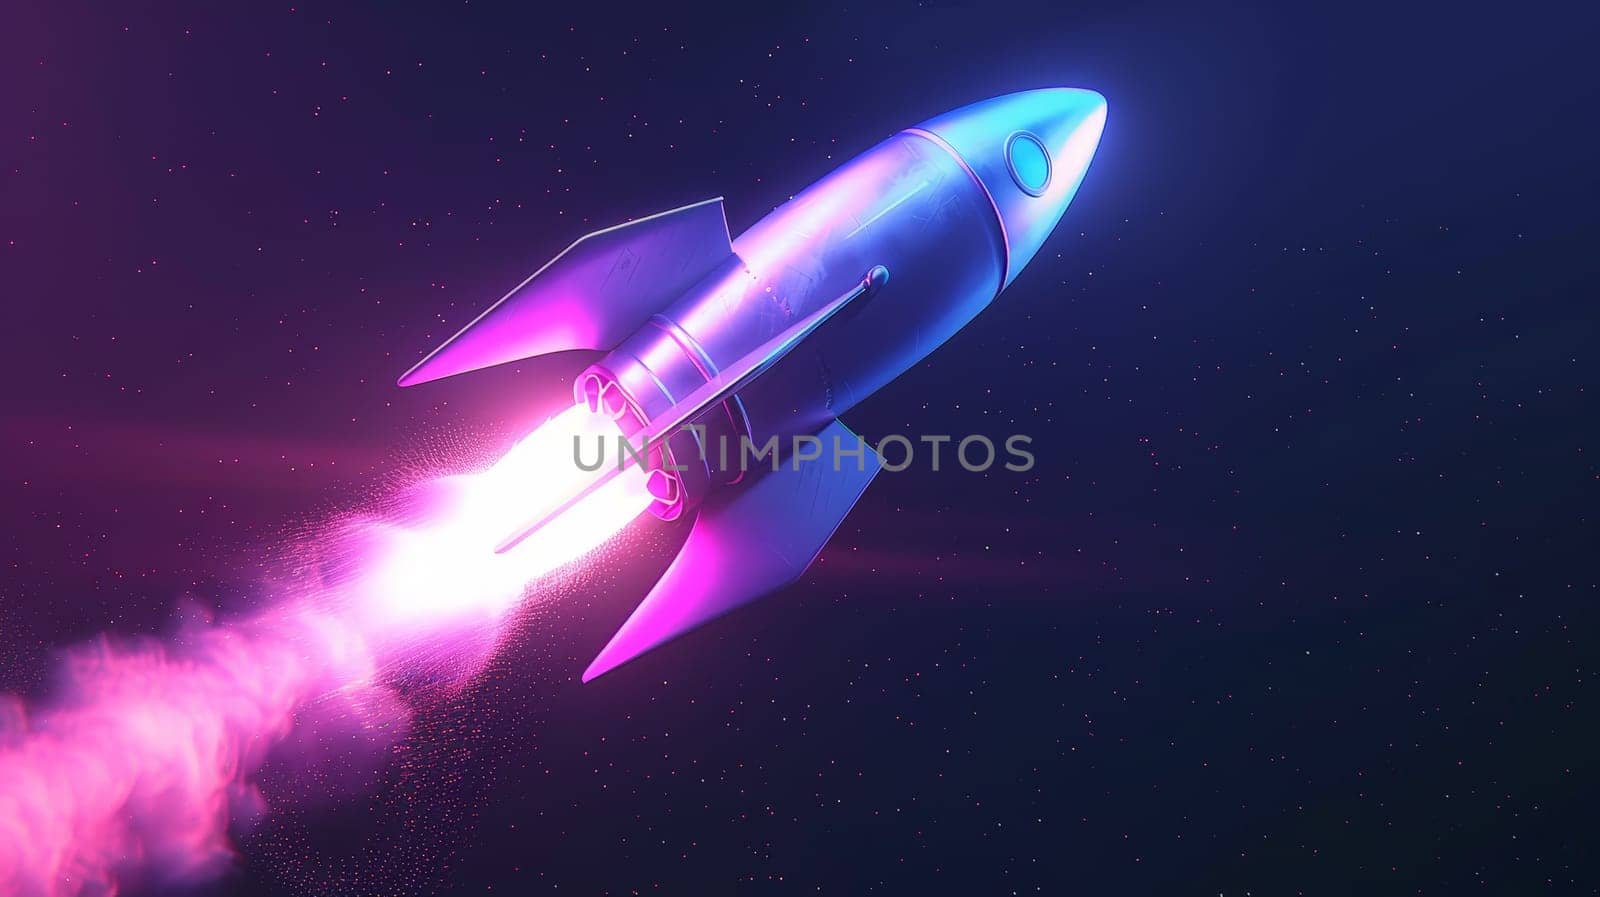 A space rocket taking off, Rocket ship launch, Startup concept with copy space.